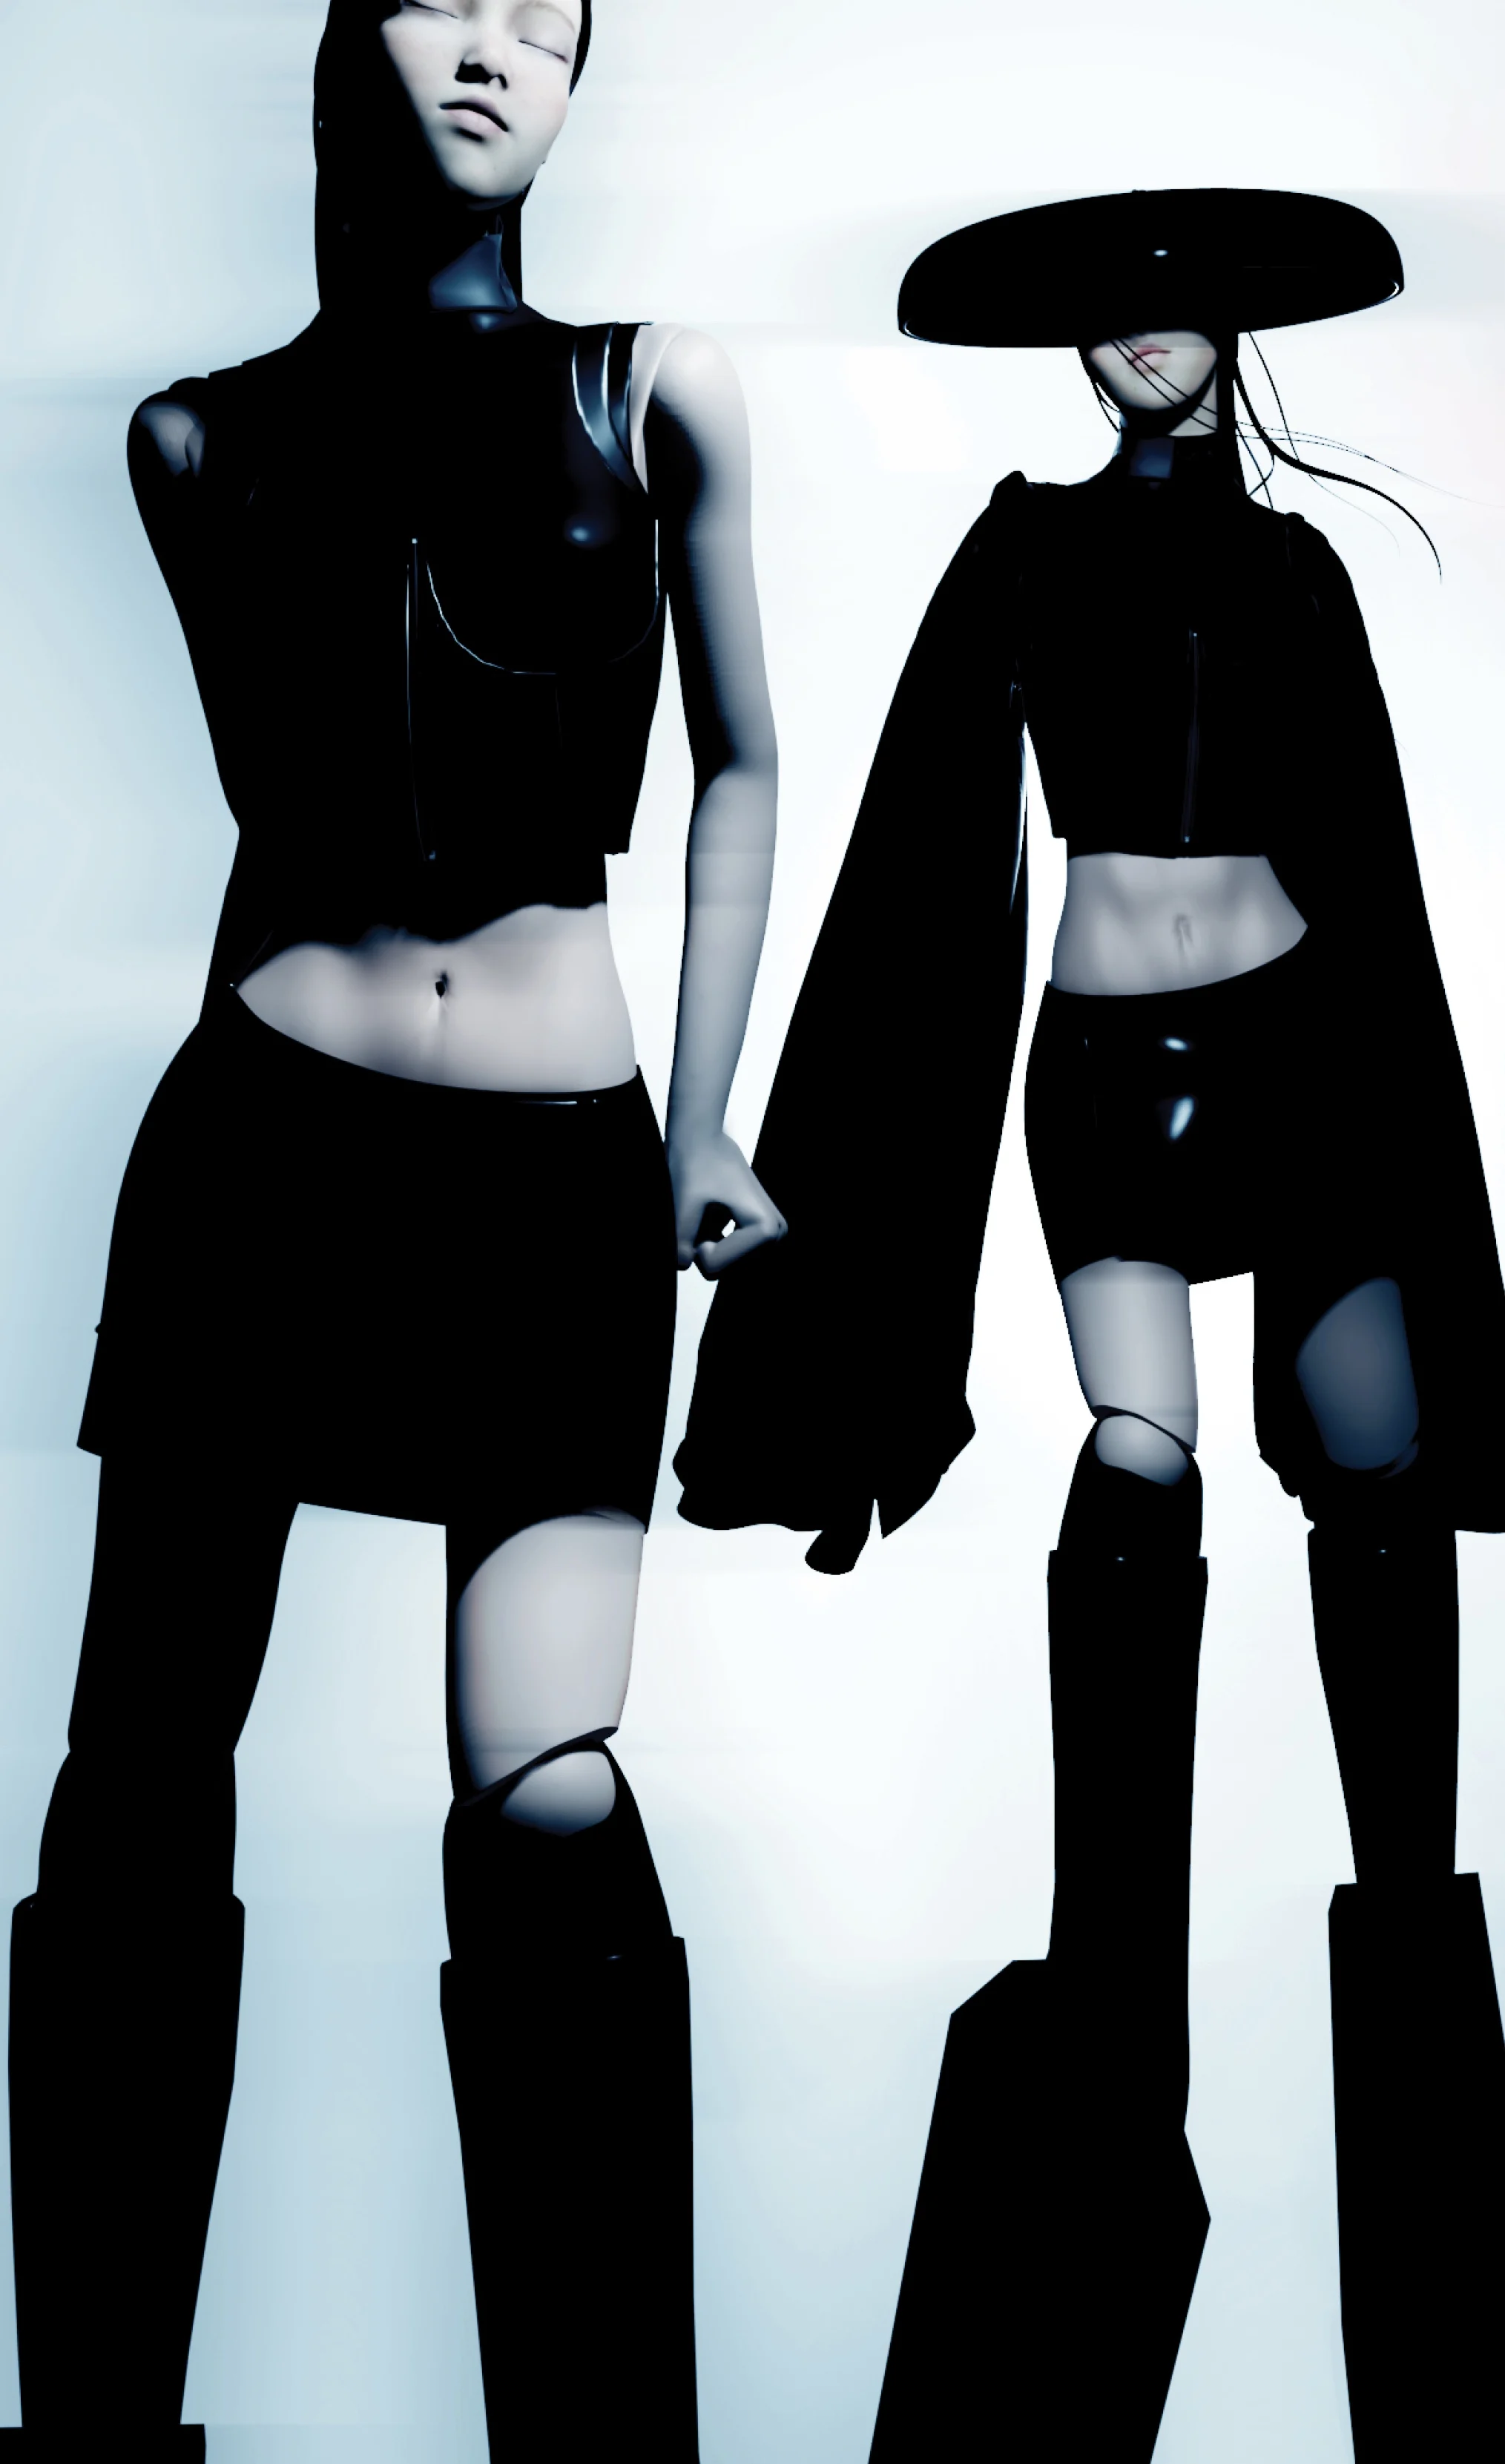 A digitally-rendered image of two women posing in all-black outfits, one of them with their eyes closed and the other with their face covered by a large hat.